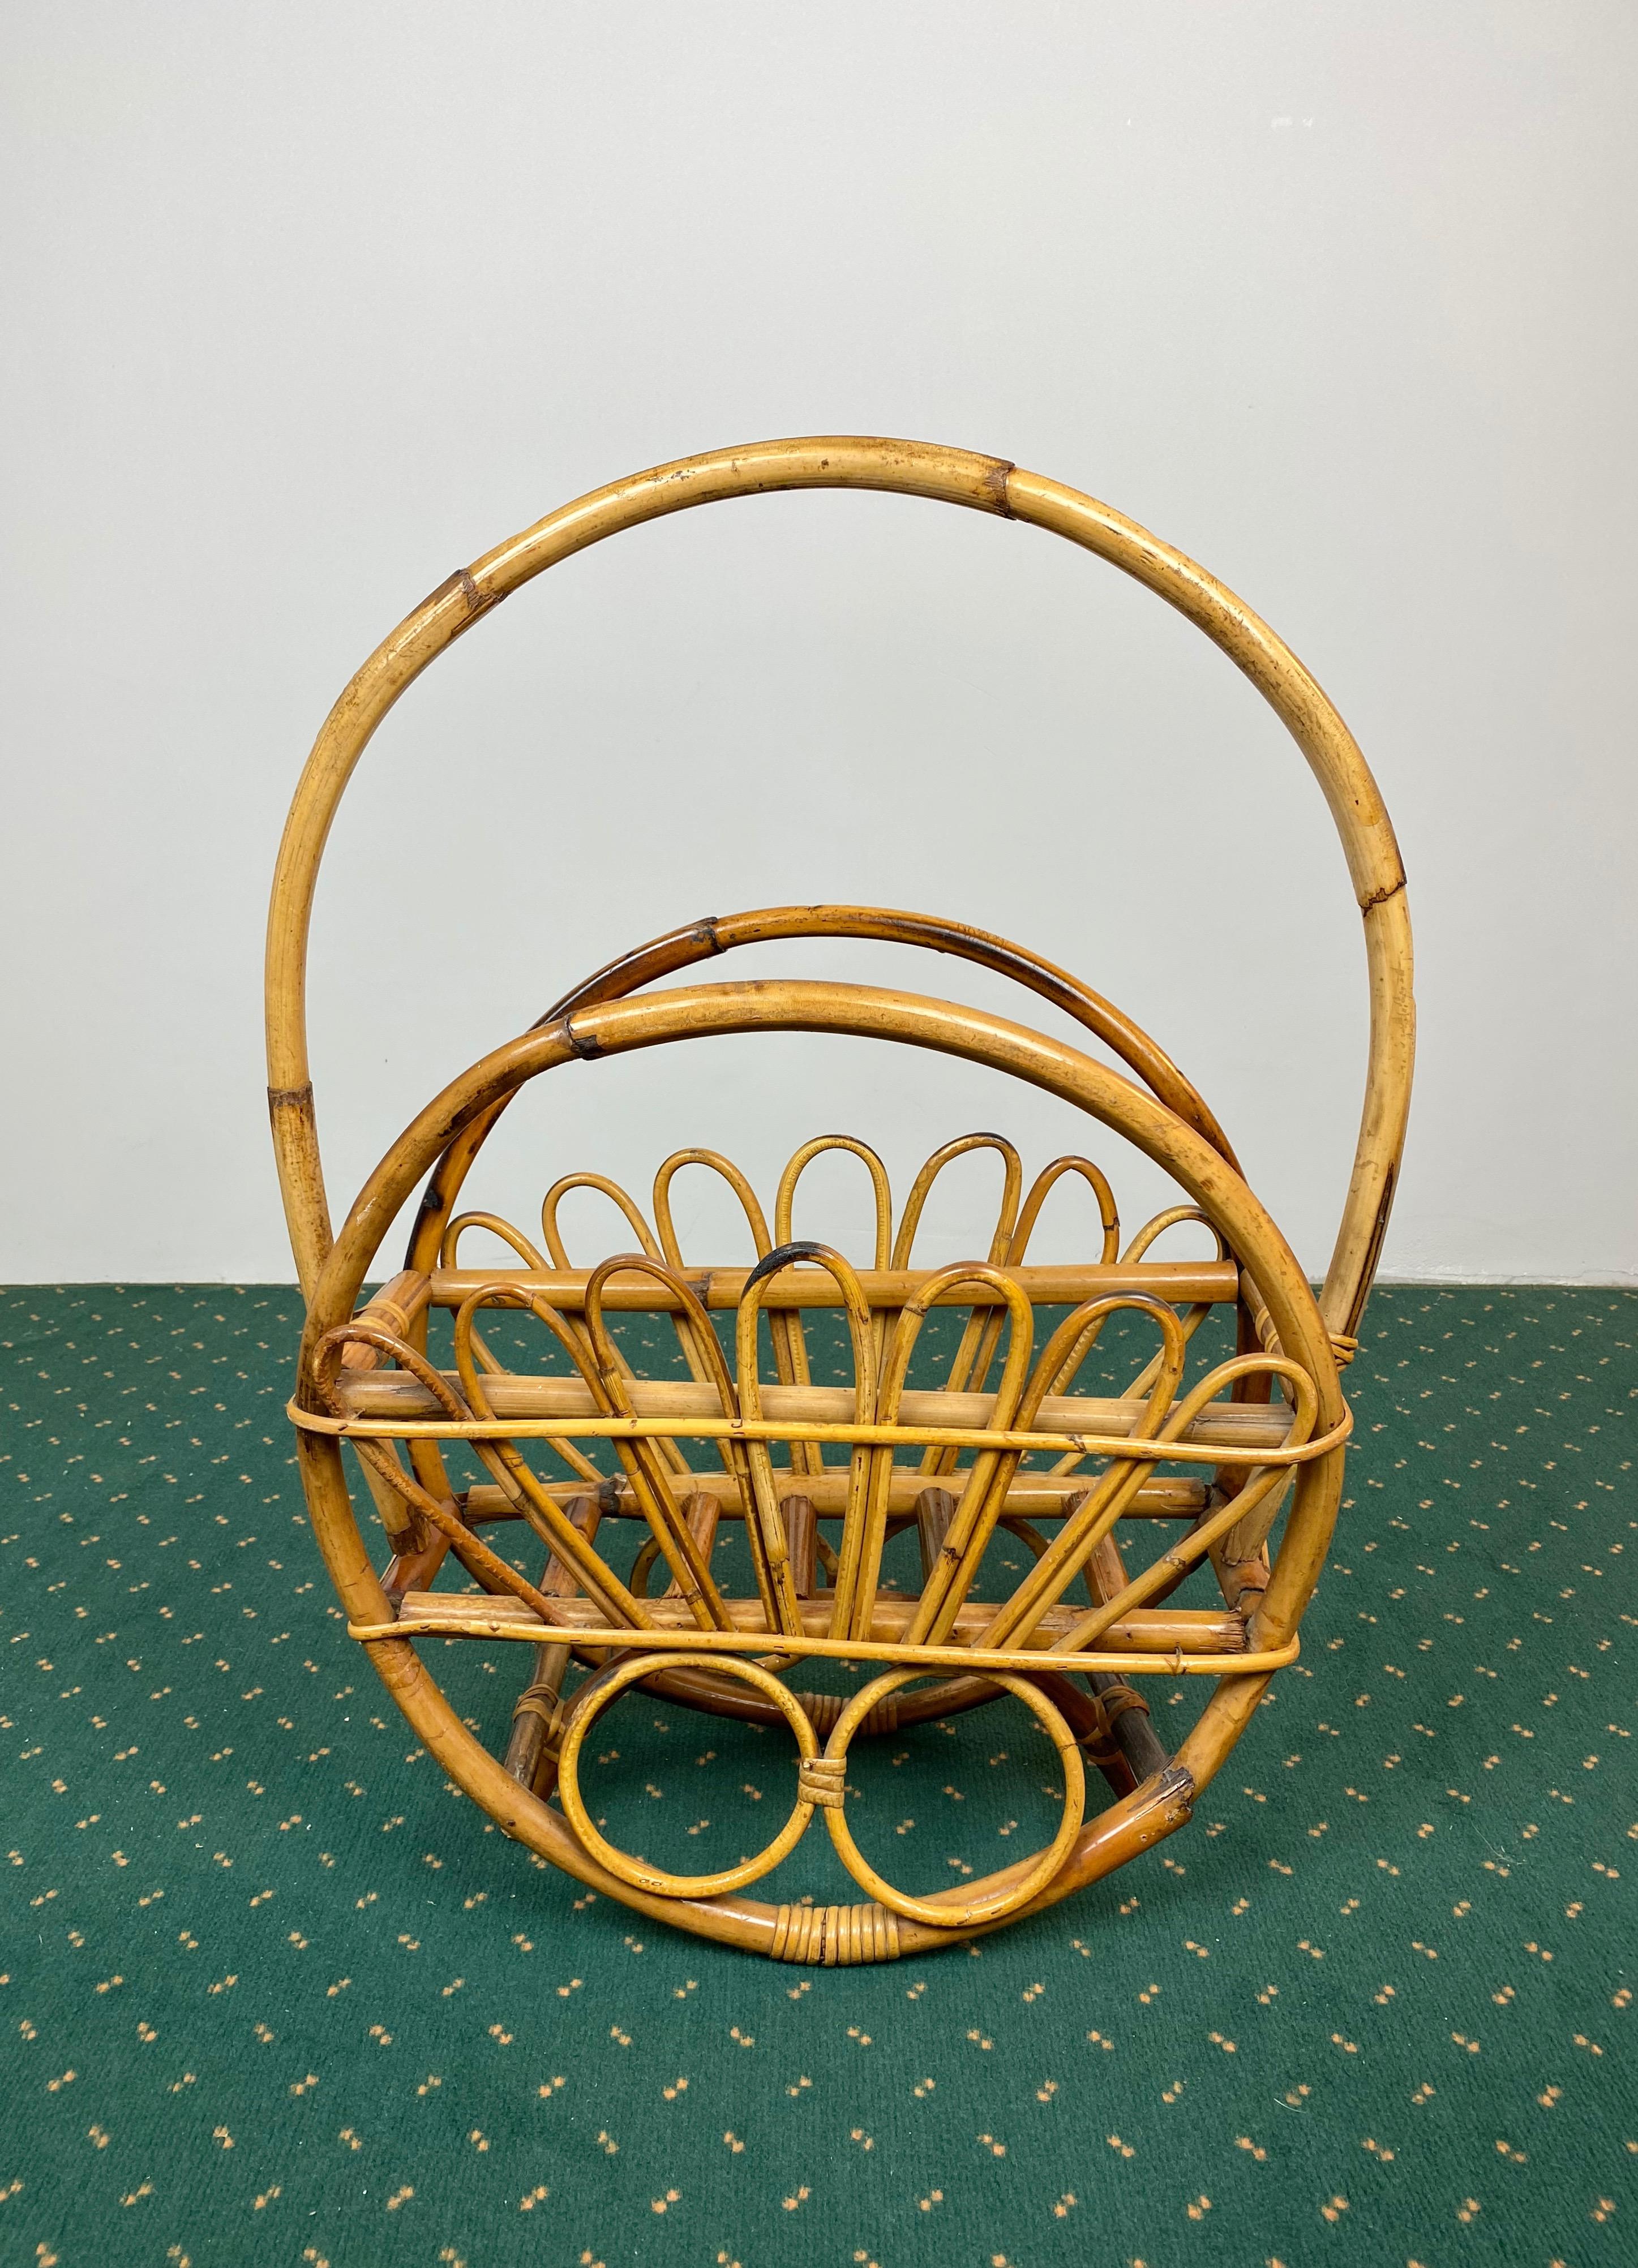 Beautiful round shaped large bamboo and rattan magazine rack with a bamboo circular handle to hold it.
Italy, 1960s.